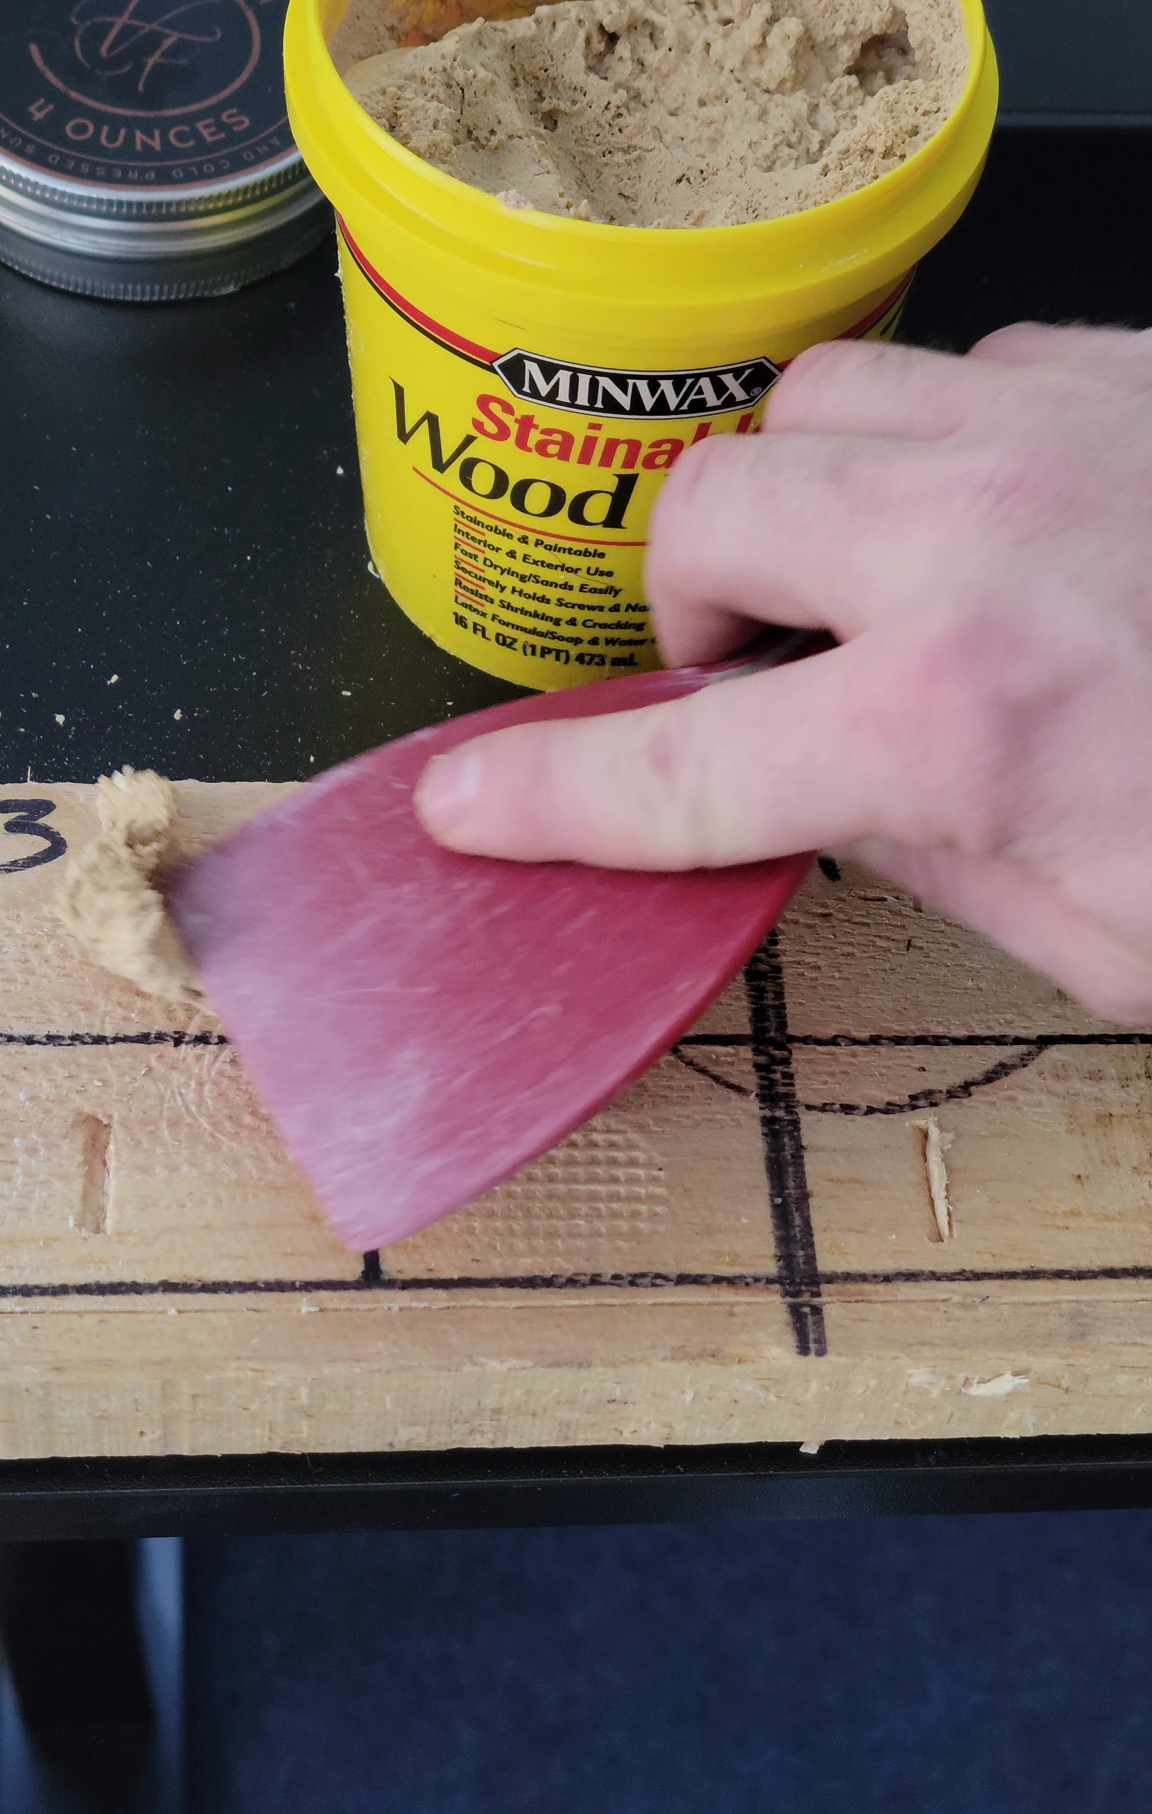 A person using a putty knife to scrape excess Minwax Stainable Wood Filler from a recently filled wood board.